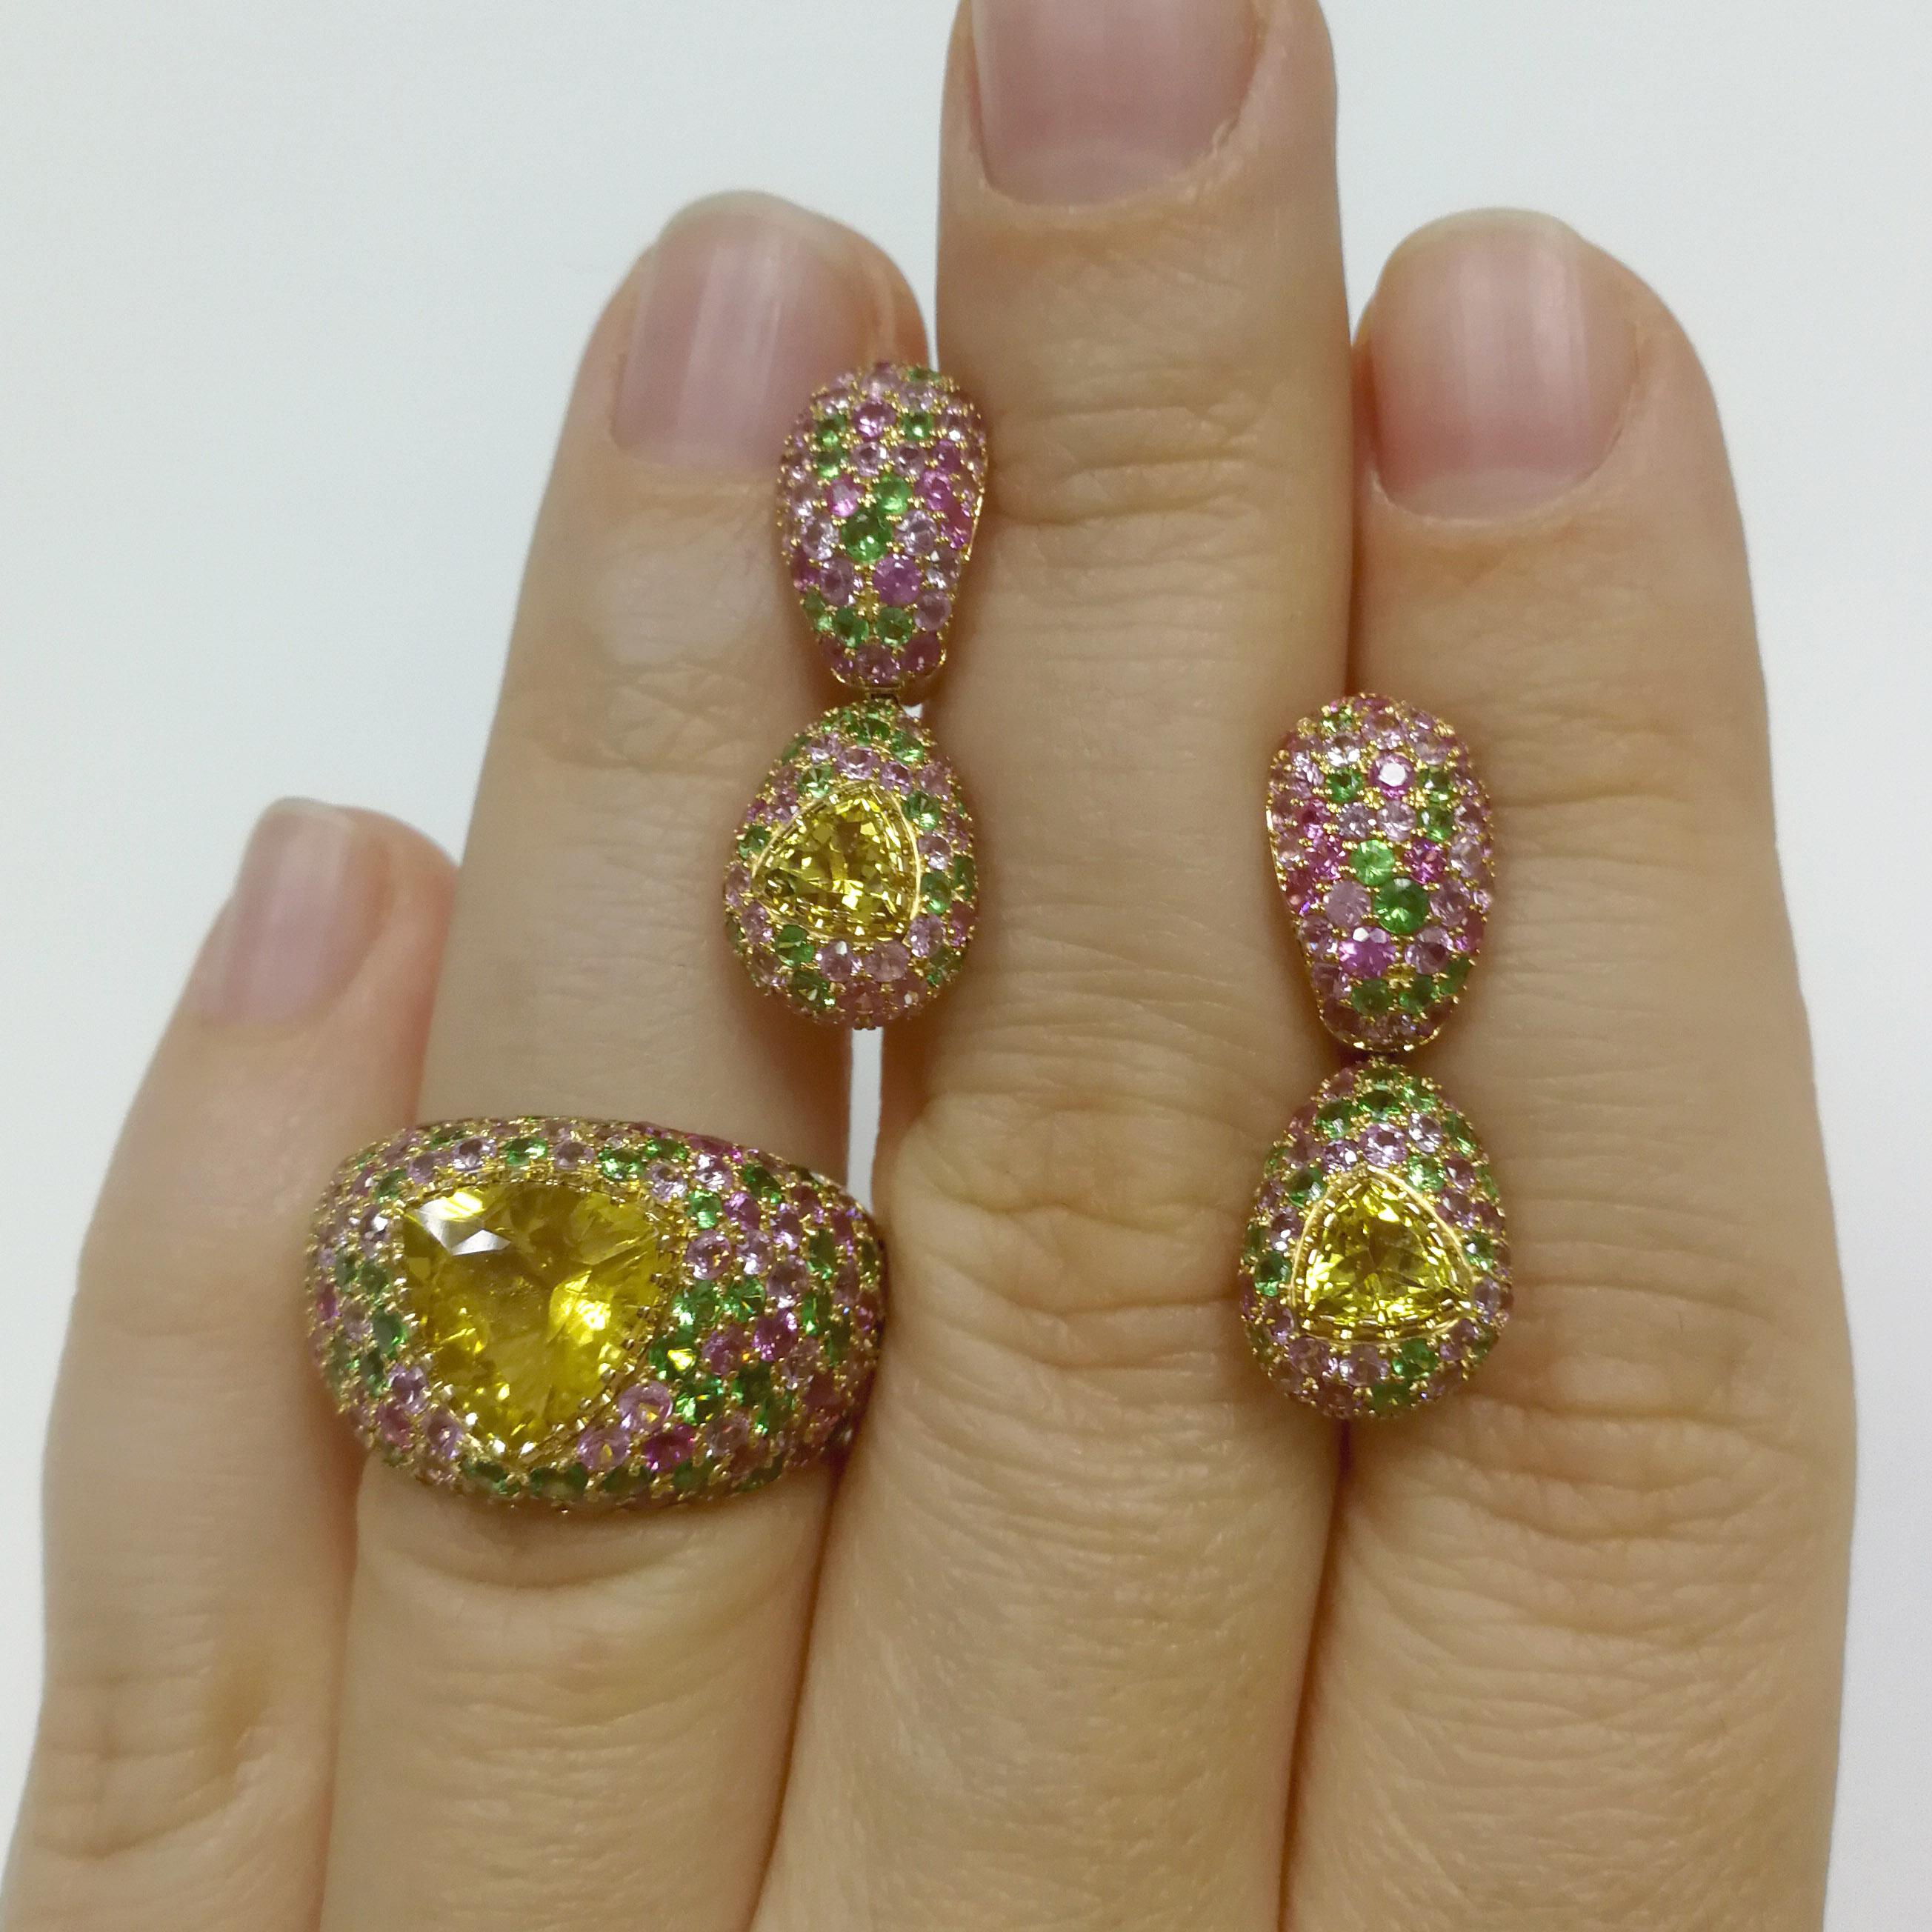 Beryl Pink Sapphires Tsavorites Yellow 18 Karat Gold Riviera Suite
The name and the variety of colours in this collection are associated with the bright Italian and French Riviera, vivid and colourful houses and sun reflections on the water. A place